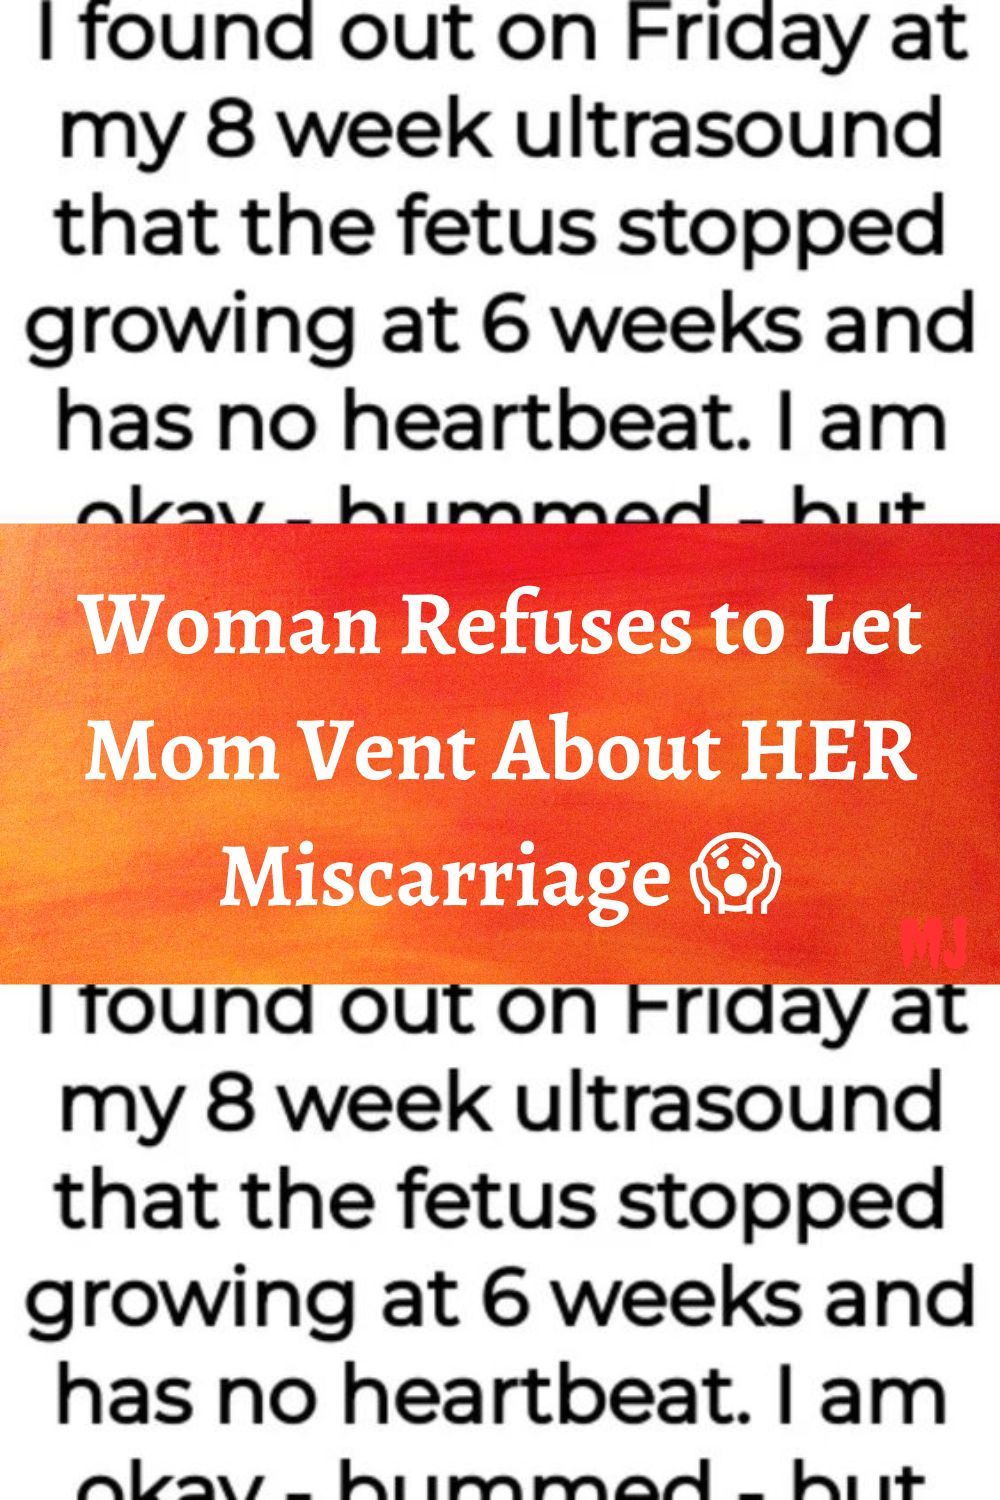 Woman Refuses to Let Mom Vent About HER Miscarriage 😱